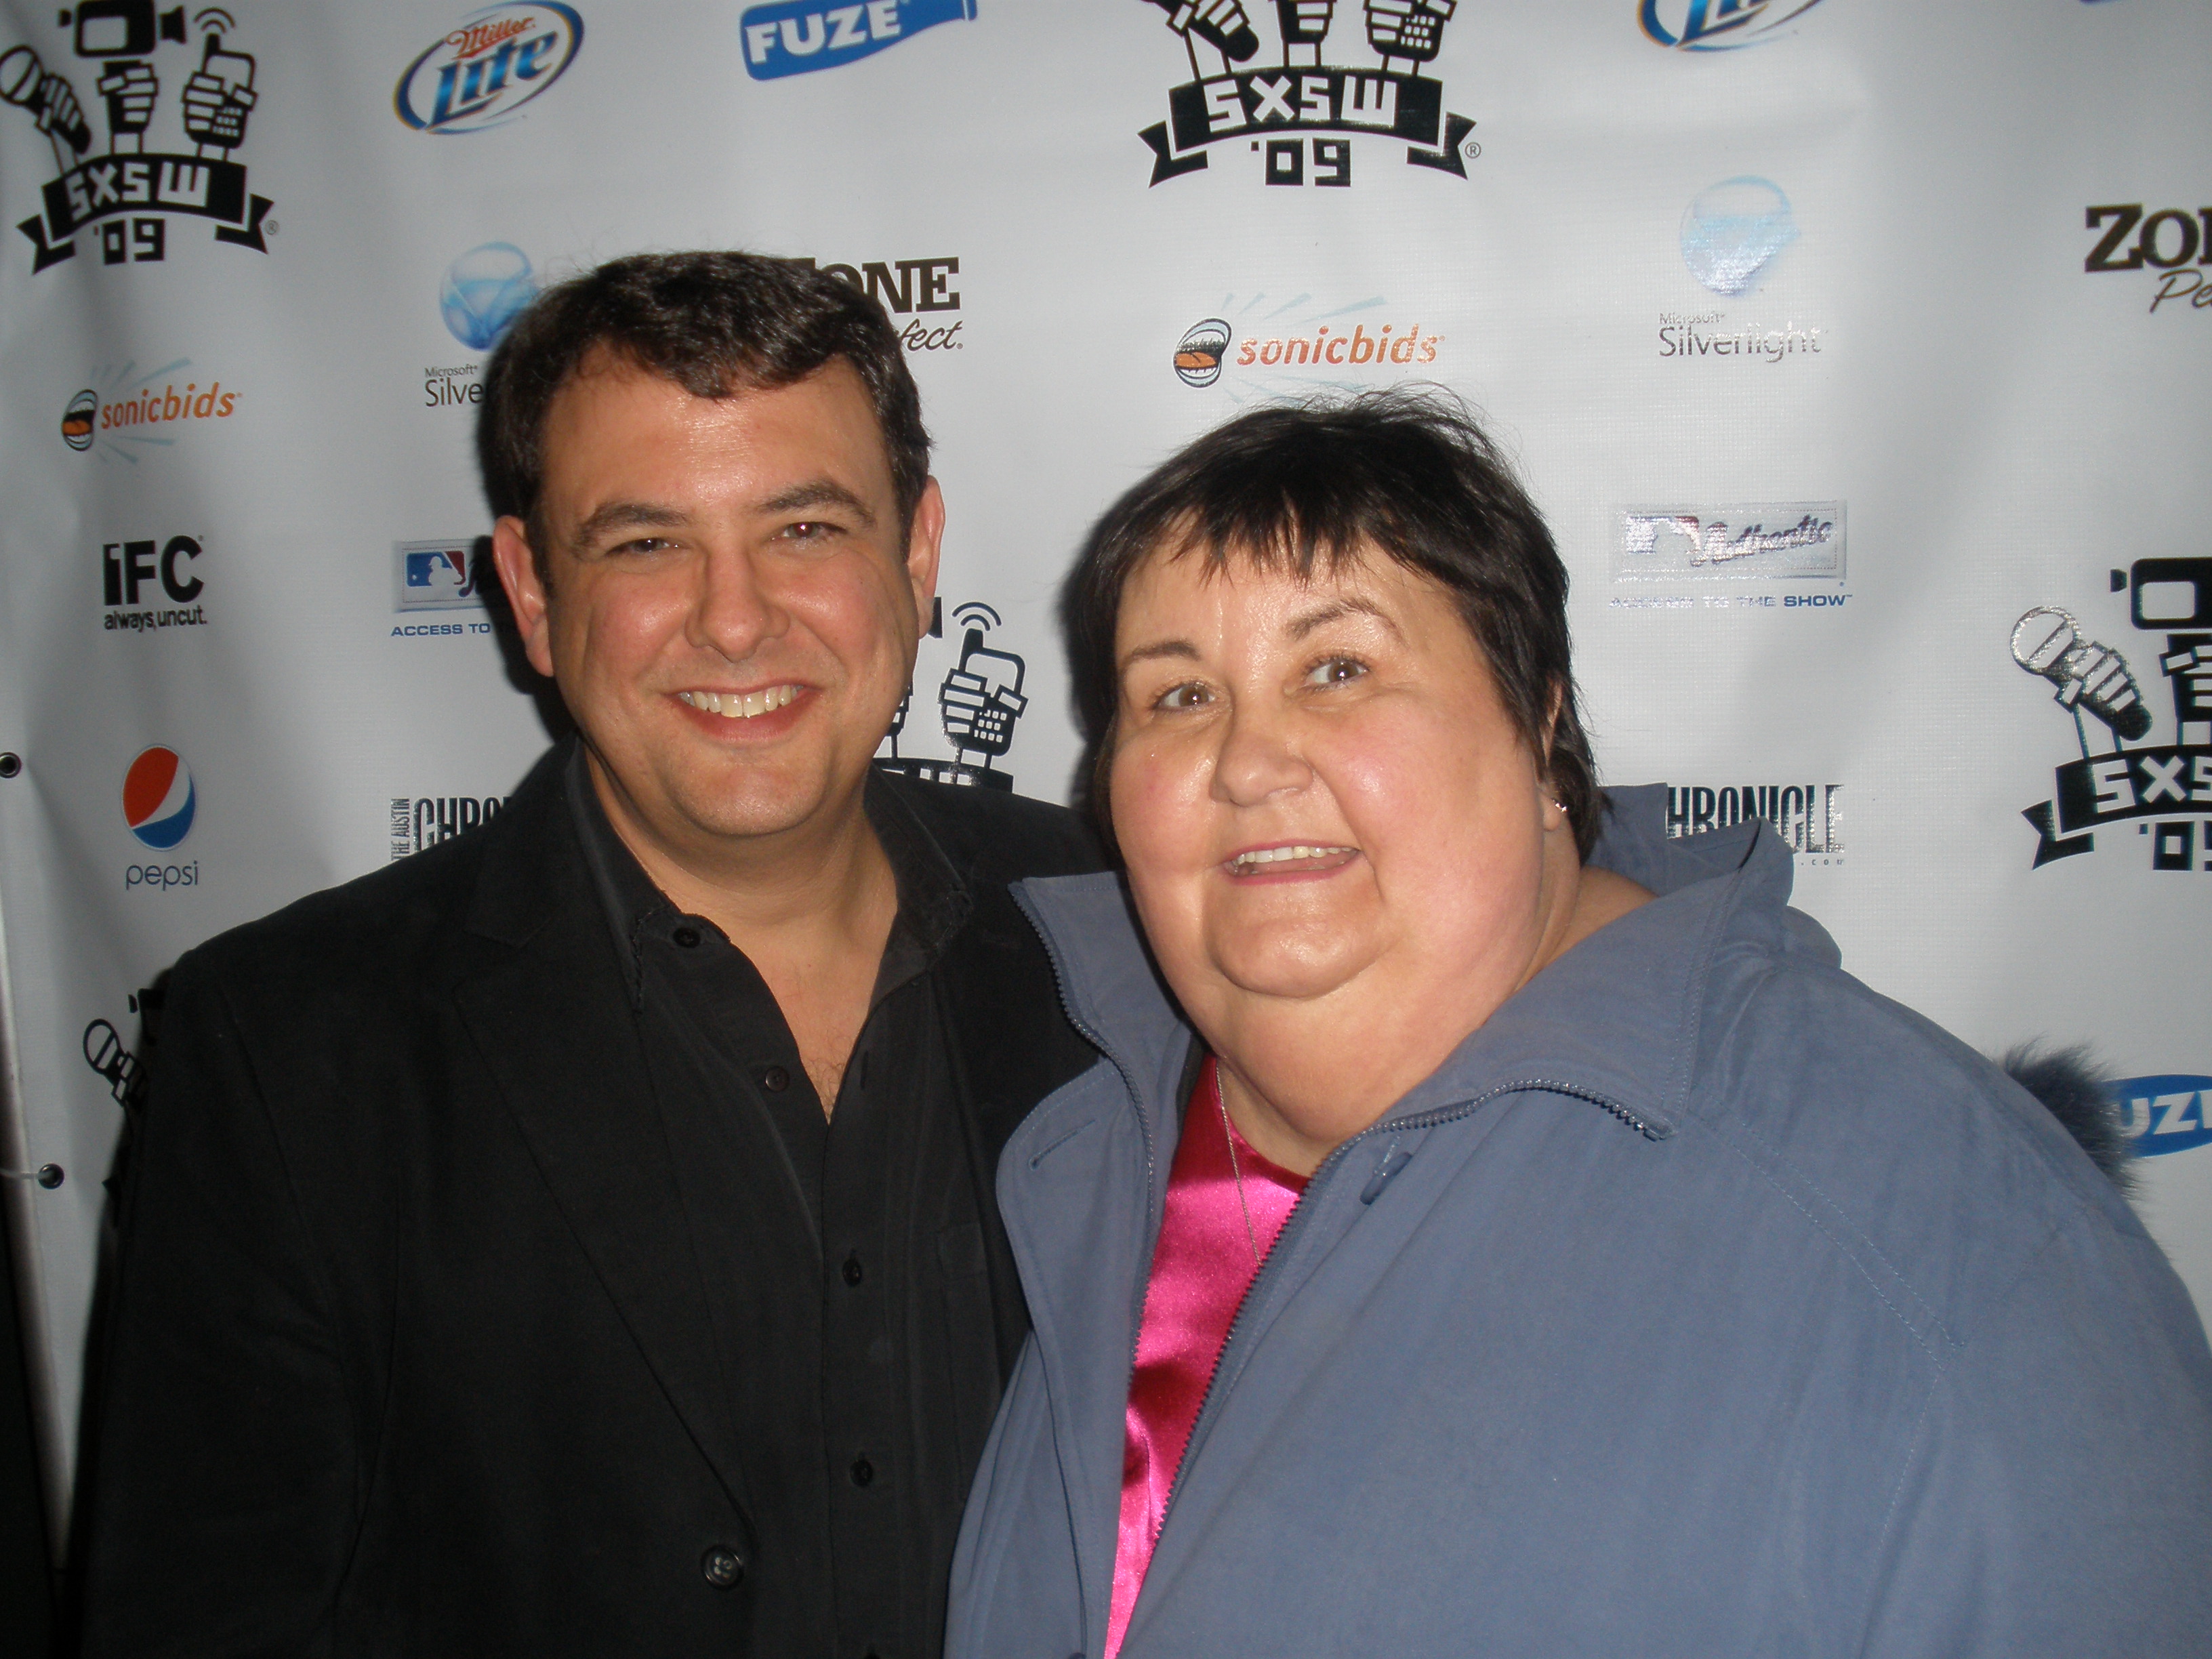 Chire Freihofer and Kathy Lamkin at SXSW 2009 premiere of 